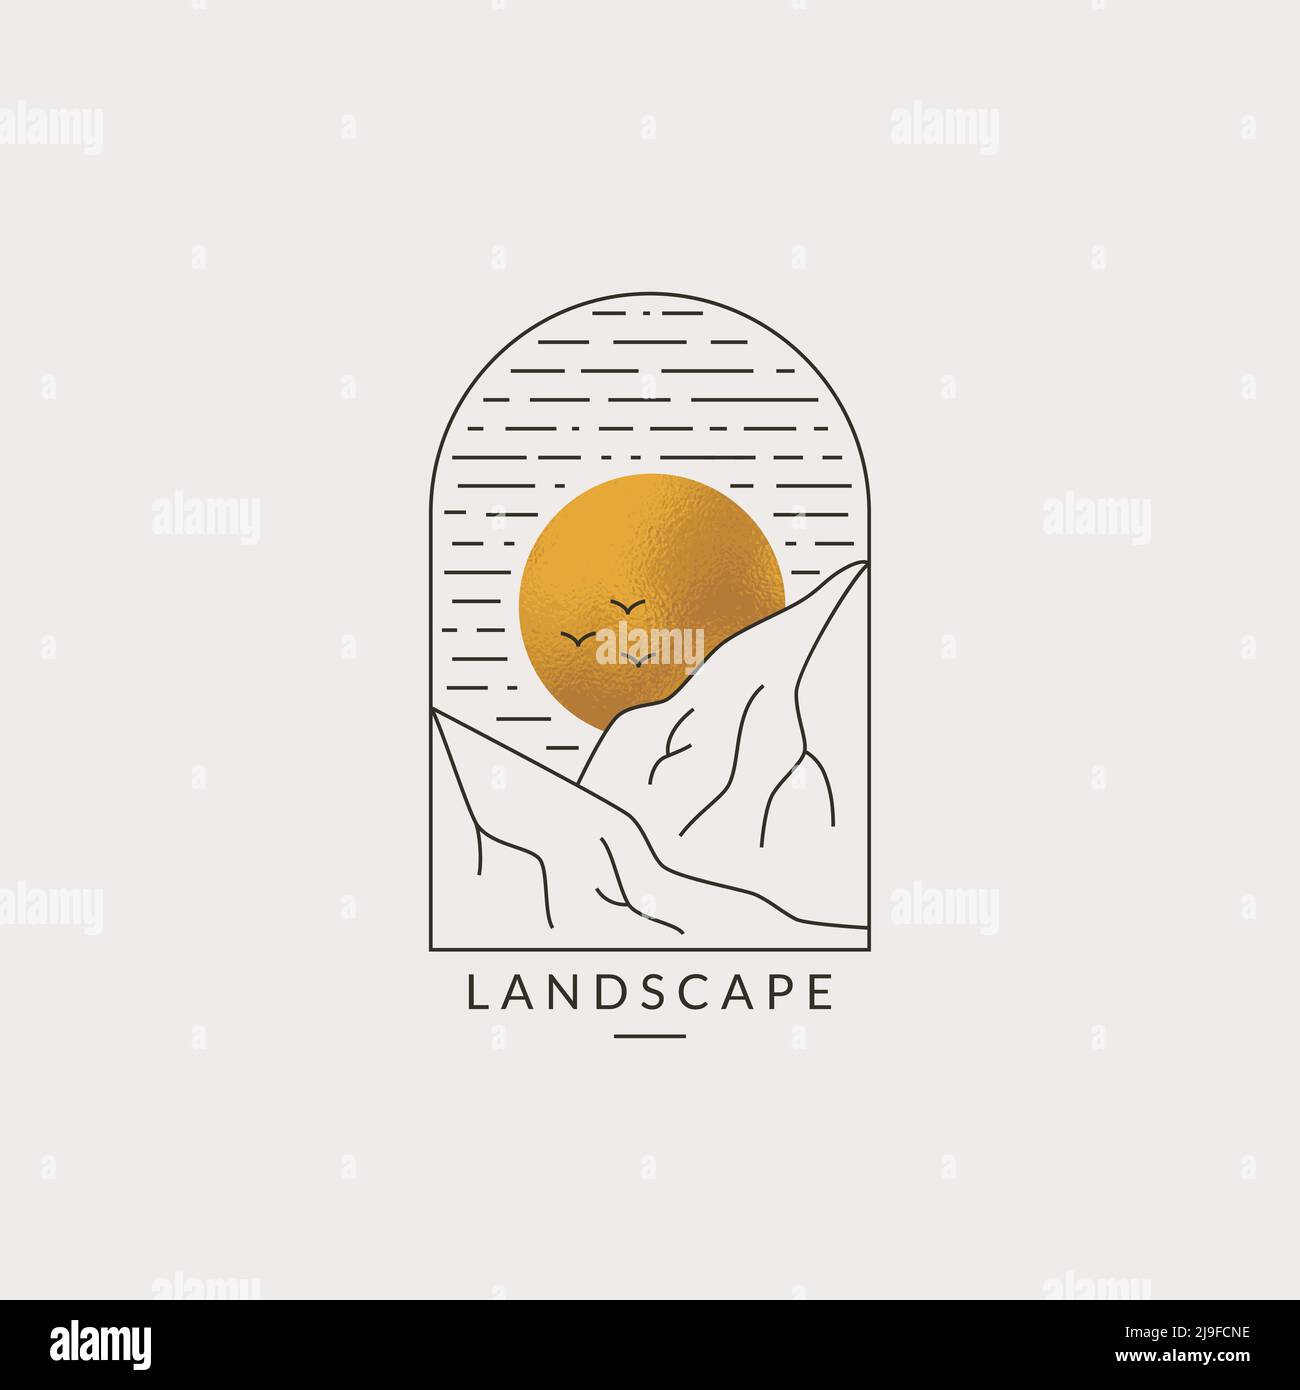 Landscape logo. Line emblem with mountains and sun. Trendy design for travel agencies, eco tourism, outdoor resort, glamping or other themes. Stock Vector